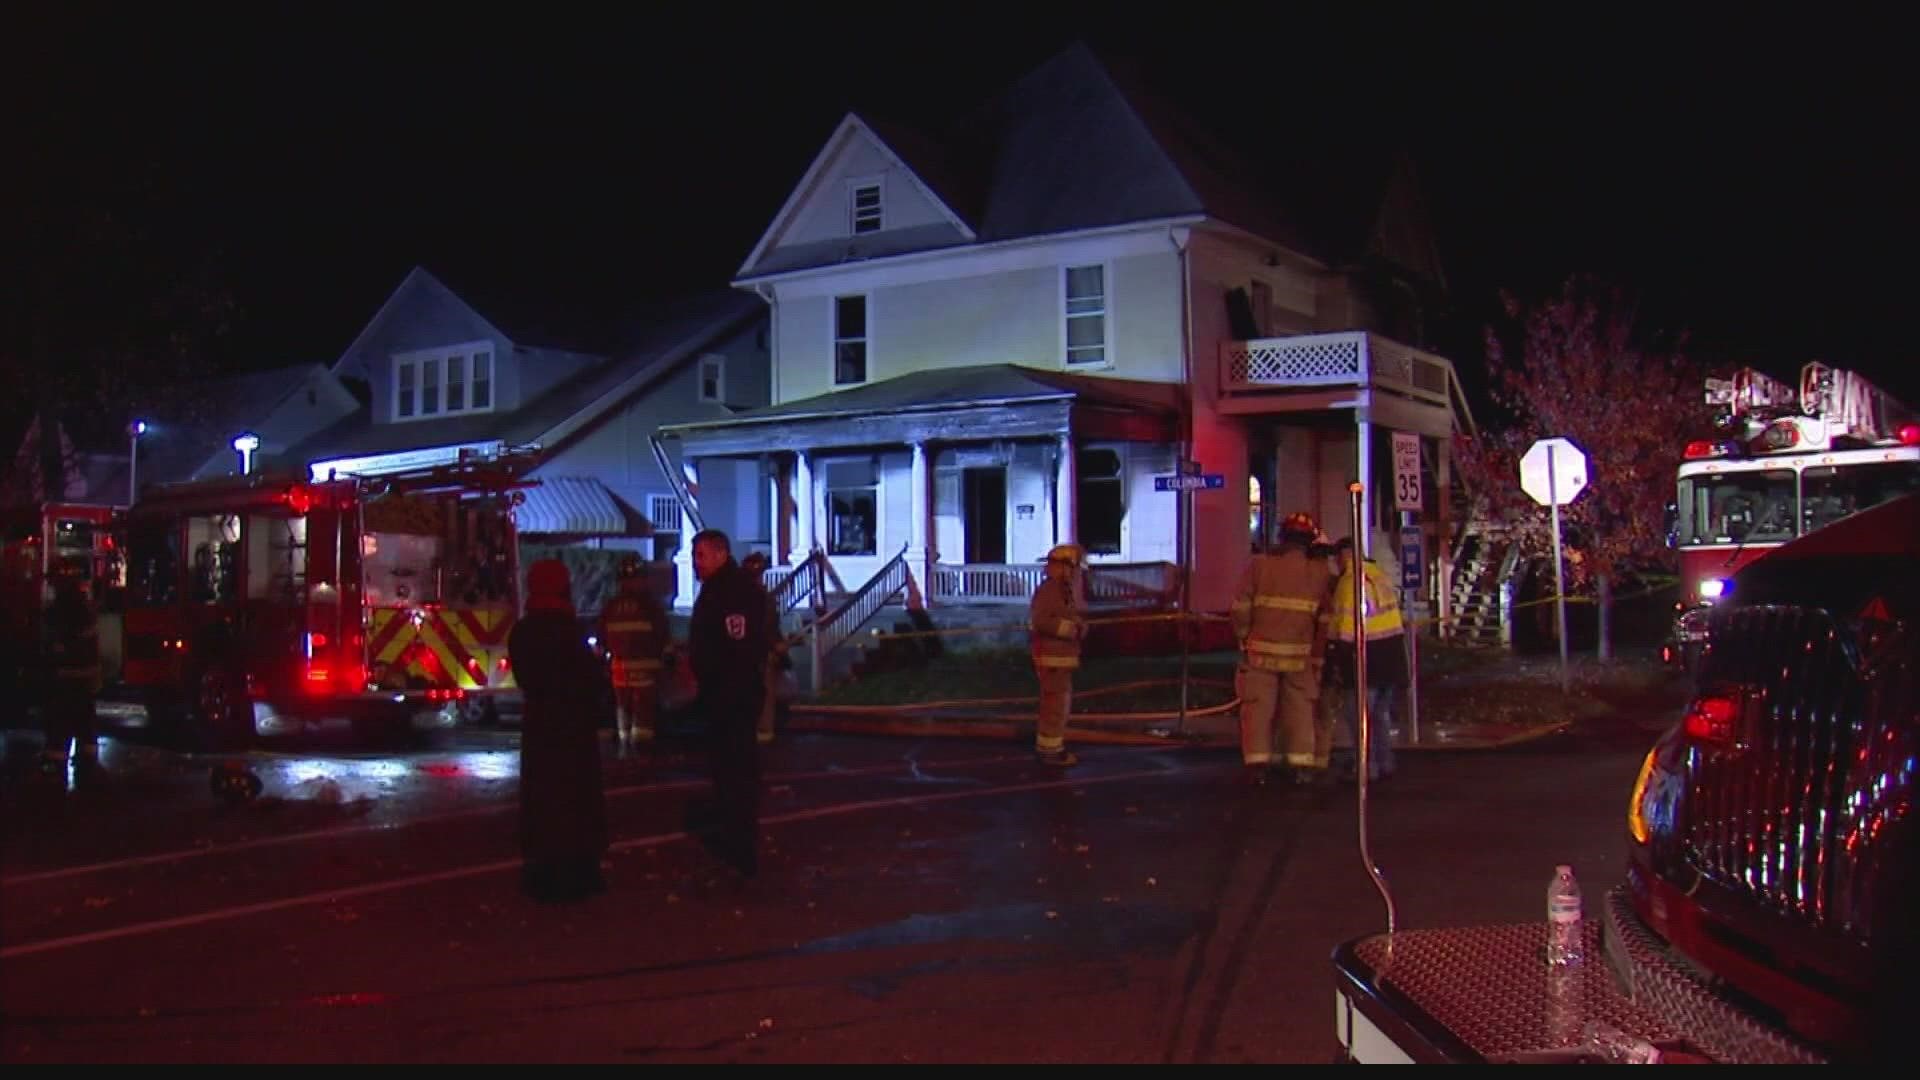 An investigation determined that the fire was intentionally set.